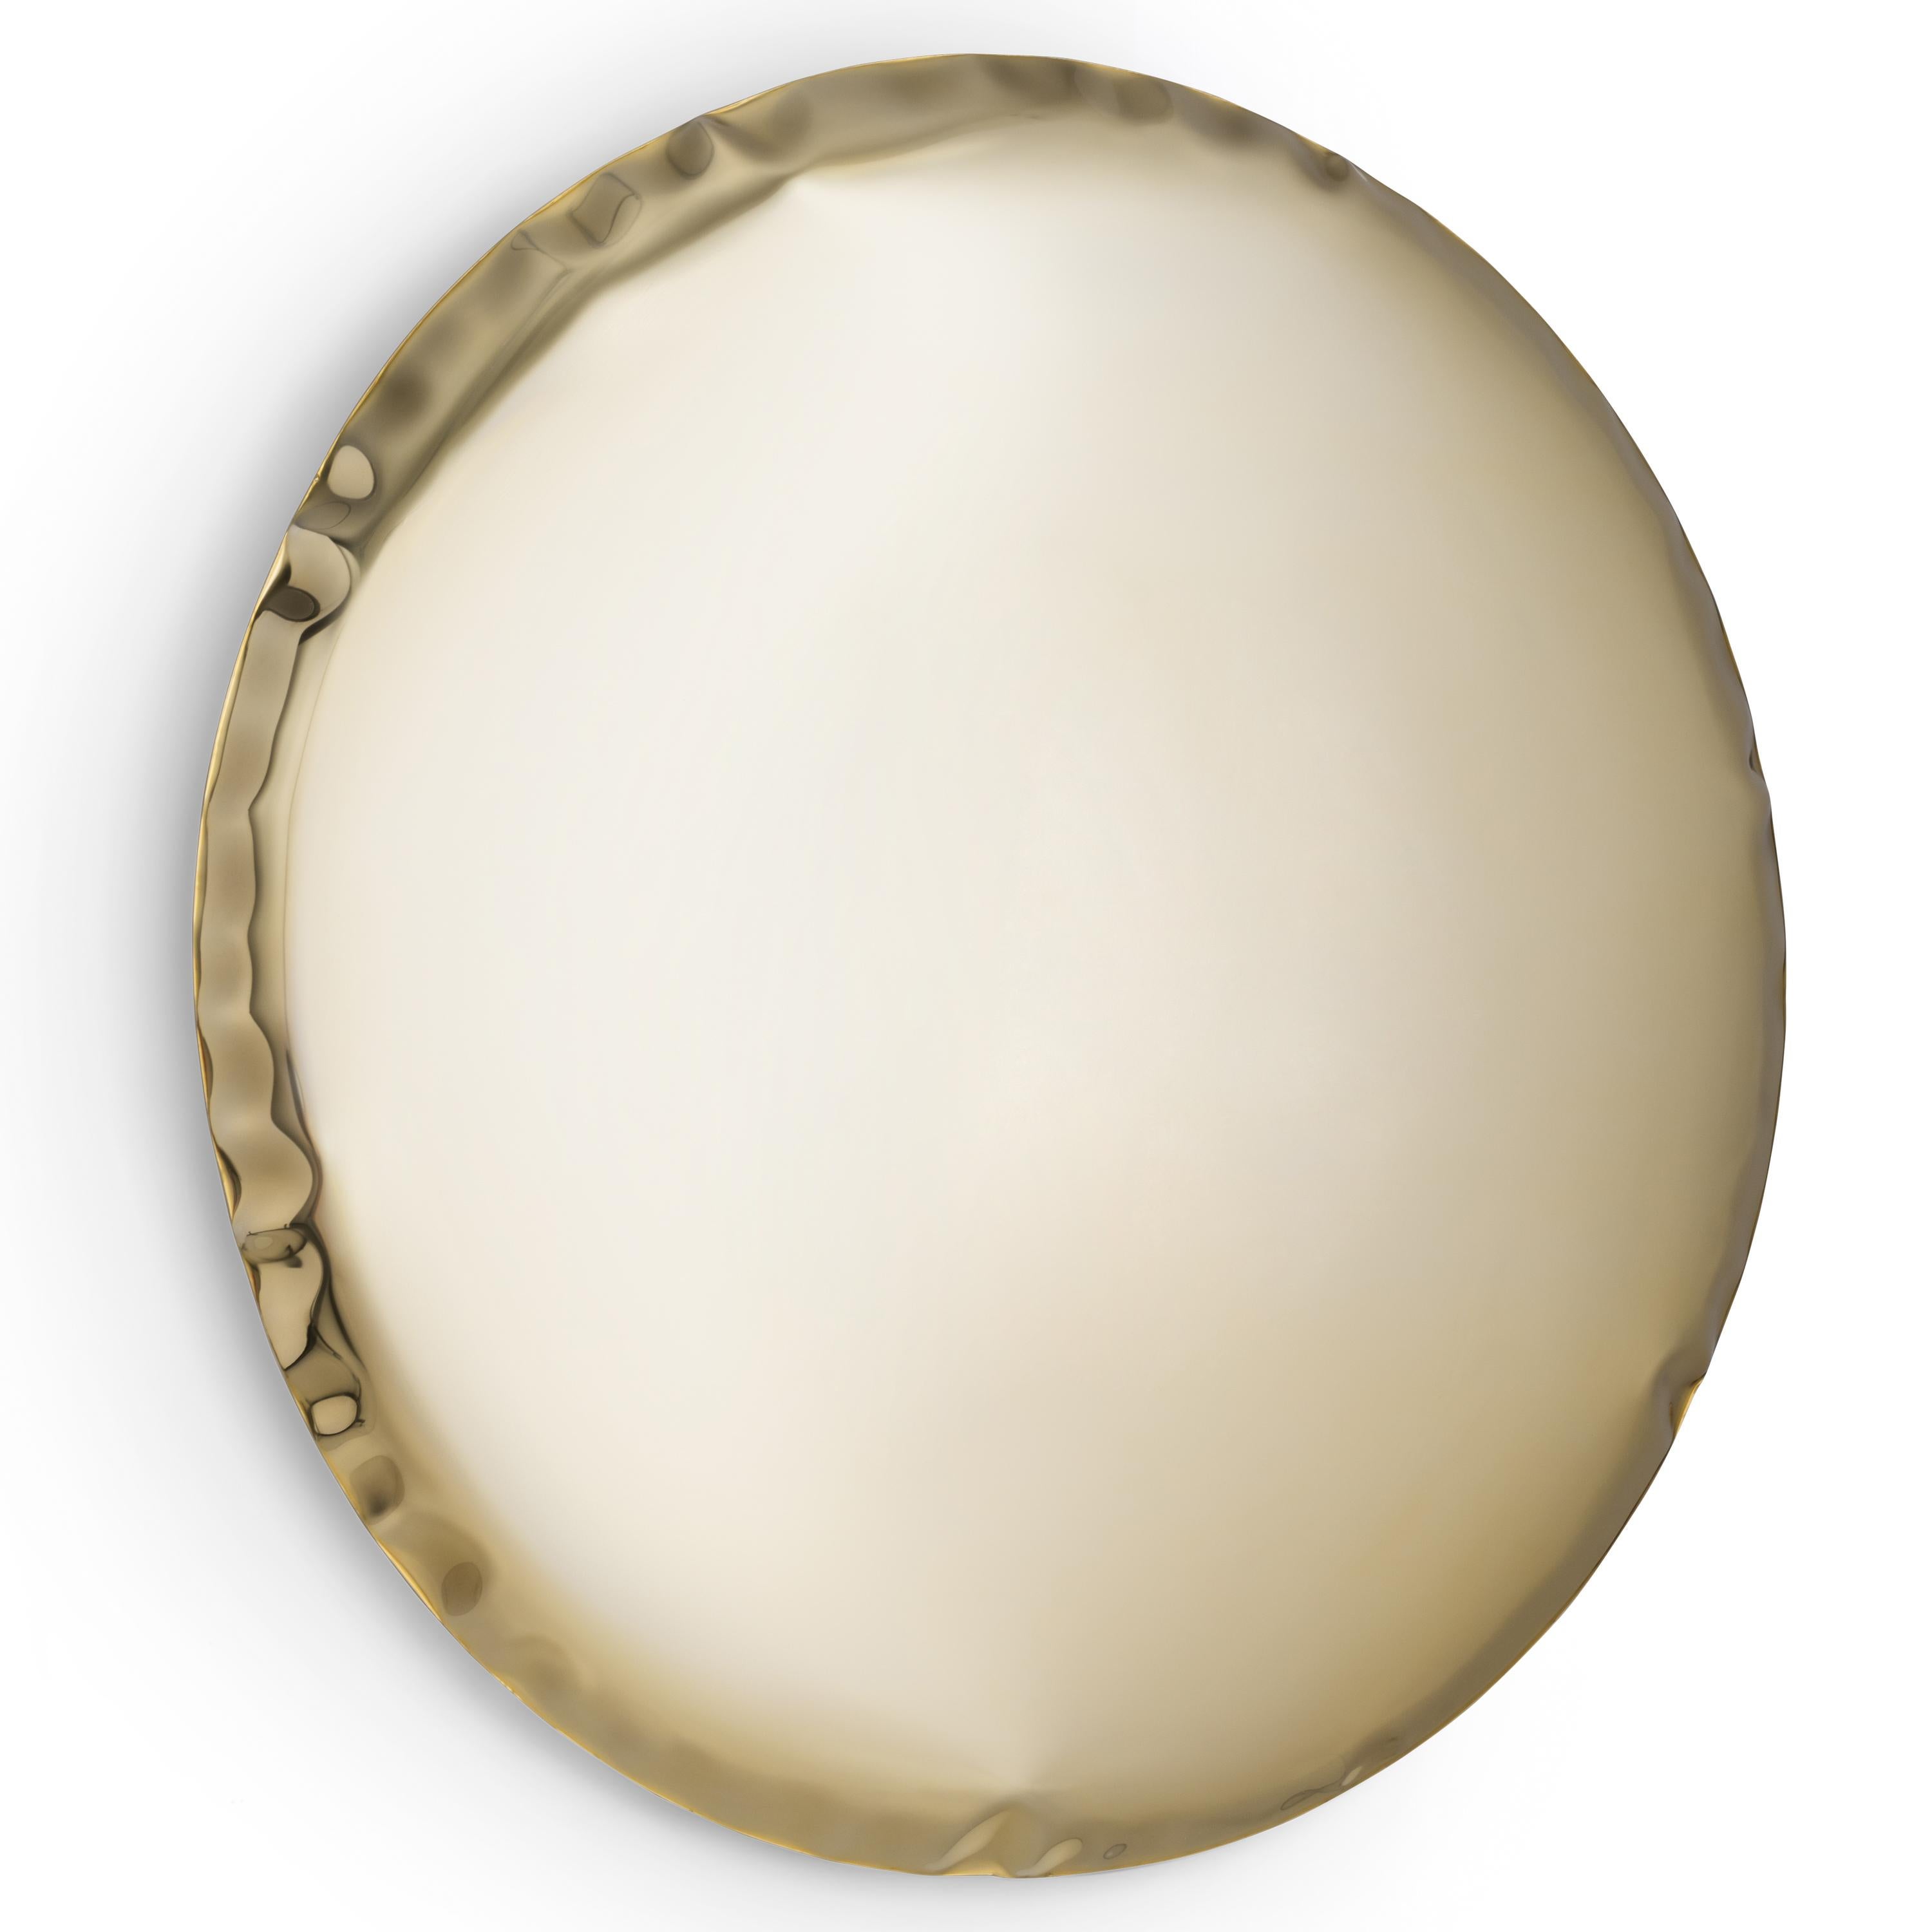 Light Gold Oko 150 sculptural wall mirror by Zieta
Dimensions: Diameter 150 x Depth 6 cm 
Material: Stainless steel. 
Finish: Light gold. 
Available in finishes: Stainless Steel, Deep Space Blue, Emerald, Saphire, Saphire/Emerald, Dark Matter, Red